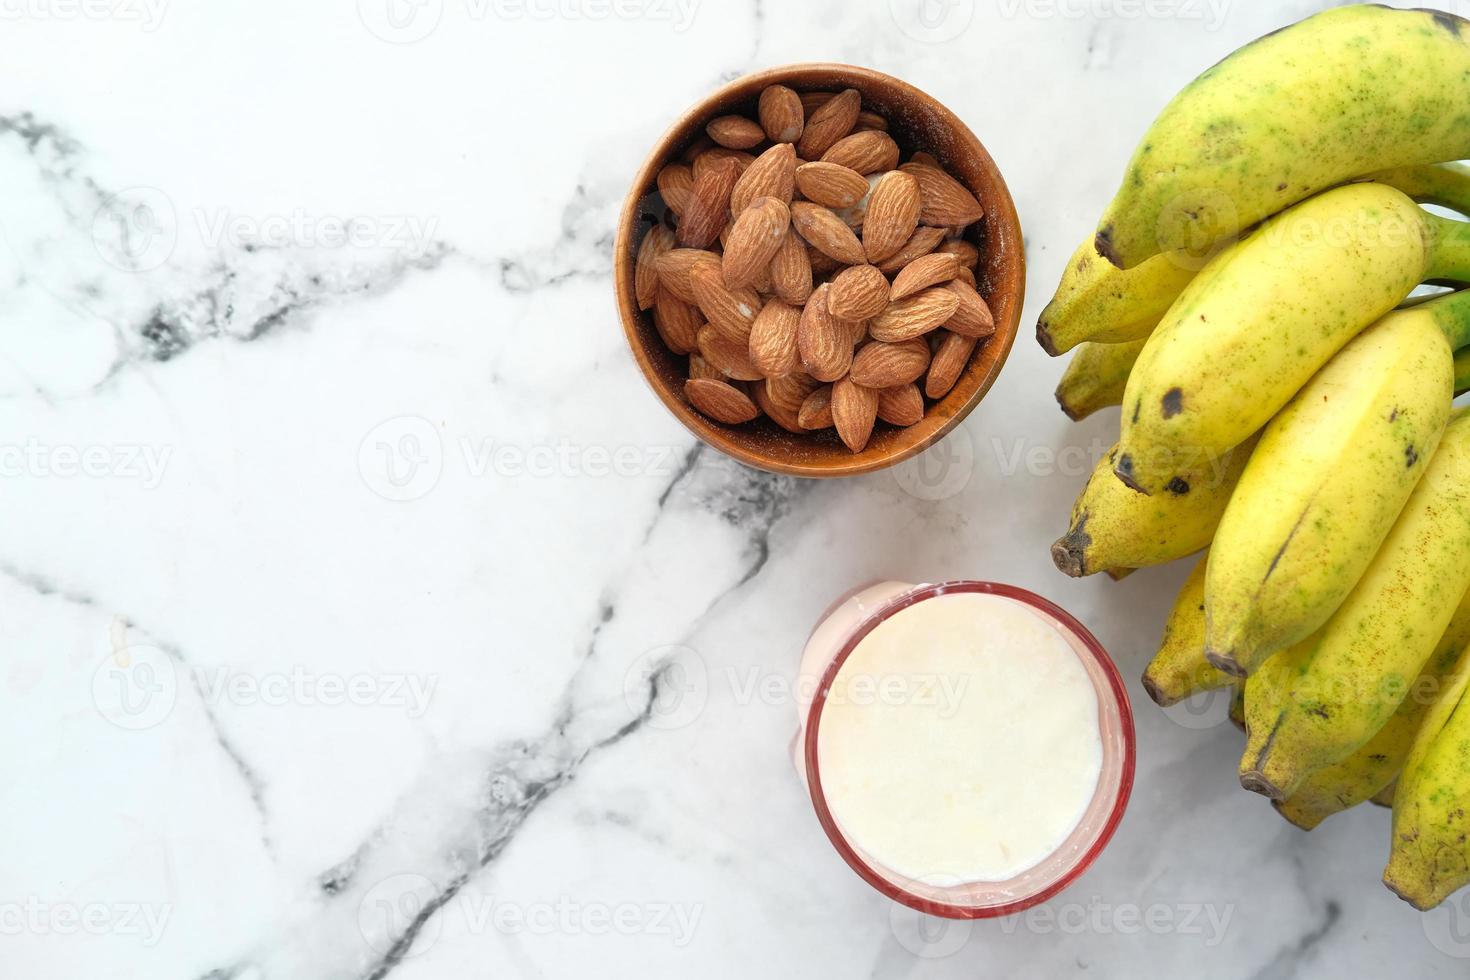 Almonds and bananas on marble background photo